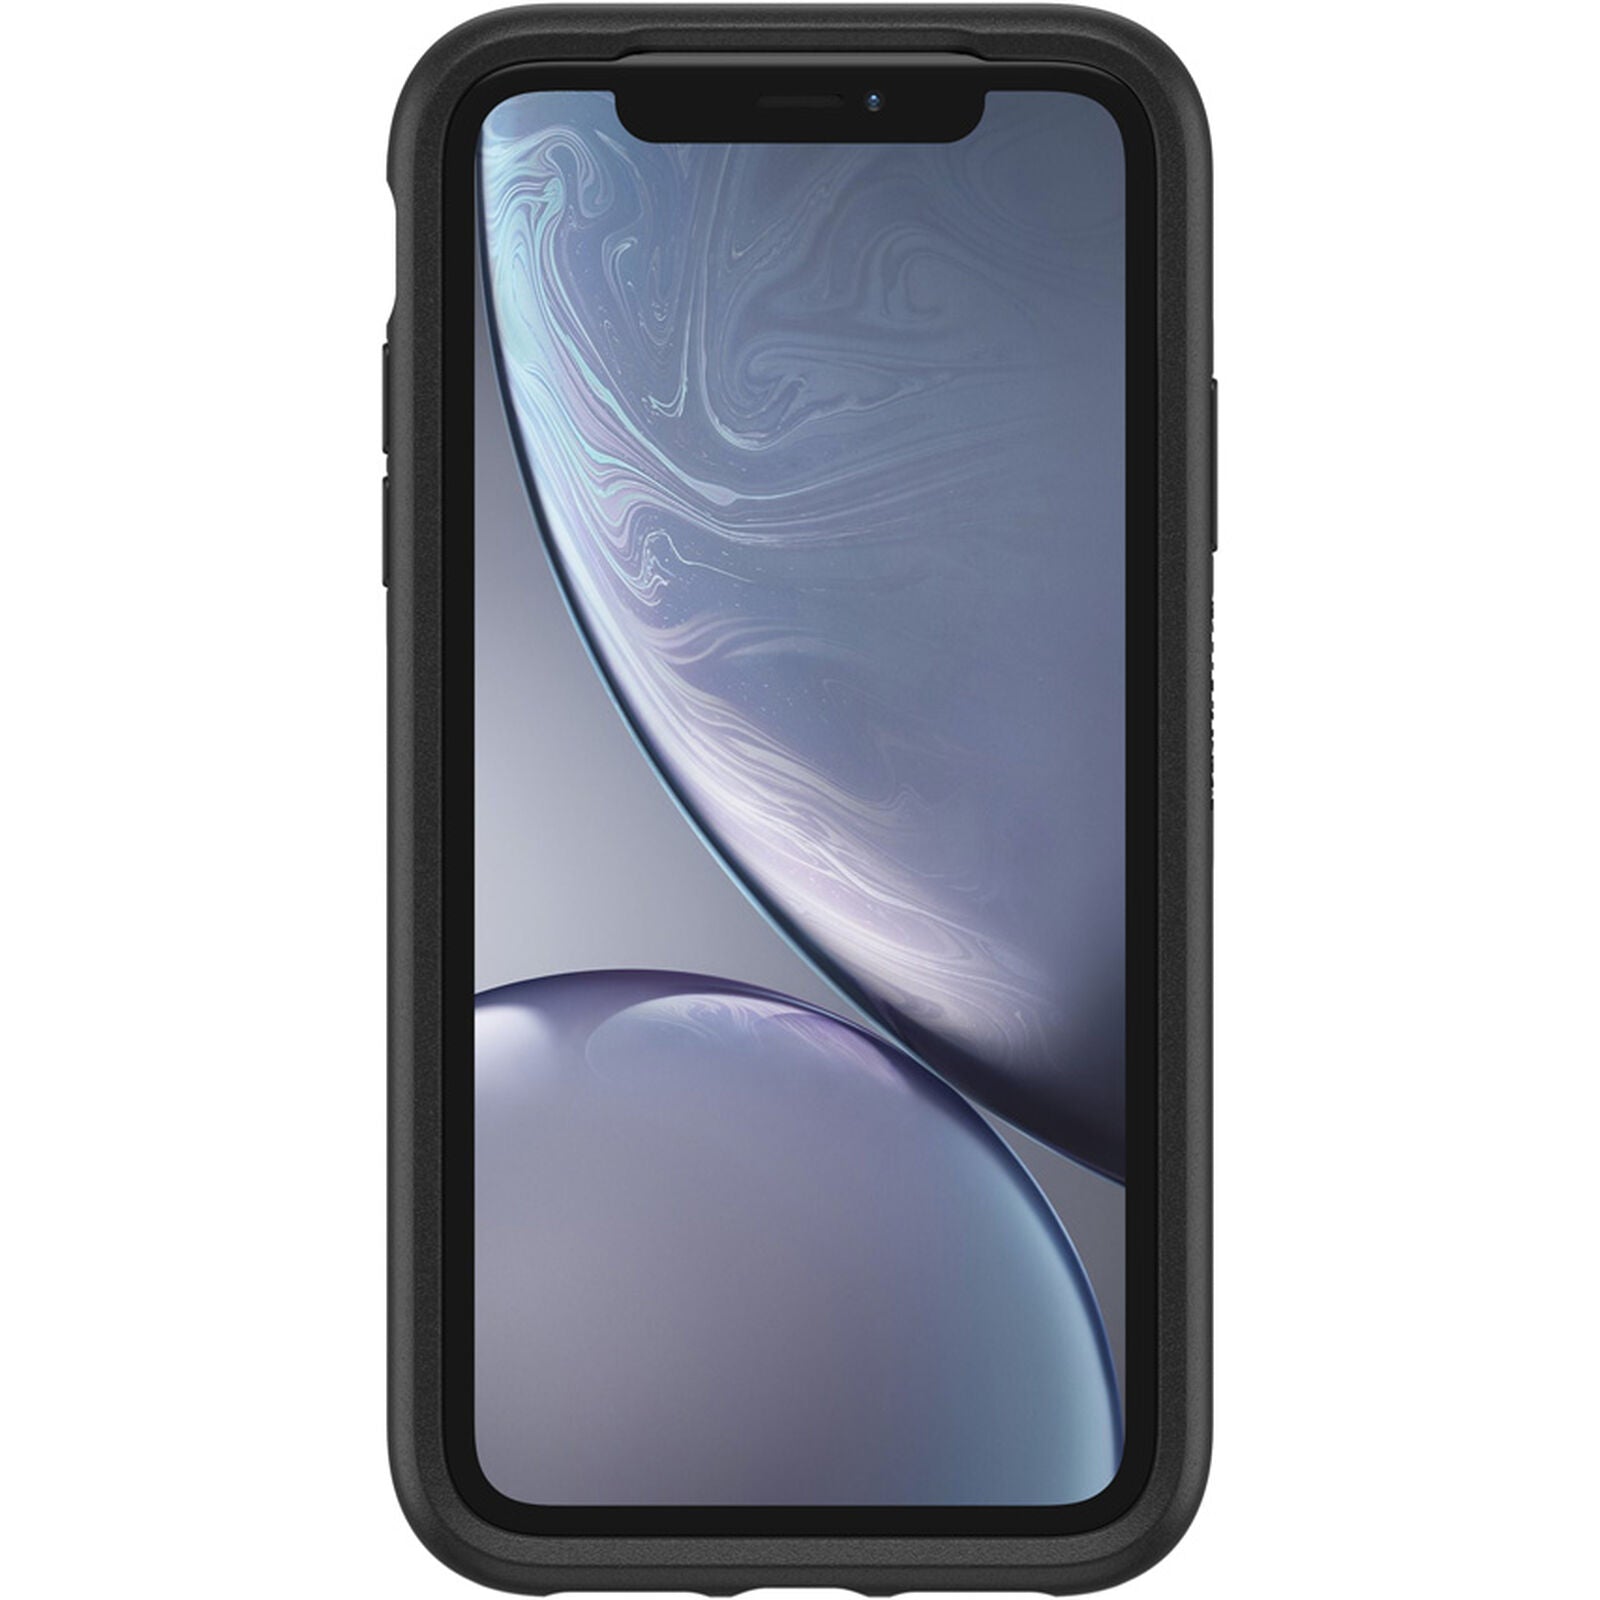 OtterBox SYMMETRY SERIES Case for Apple iPhone XR - Black (New)